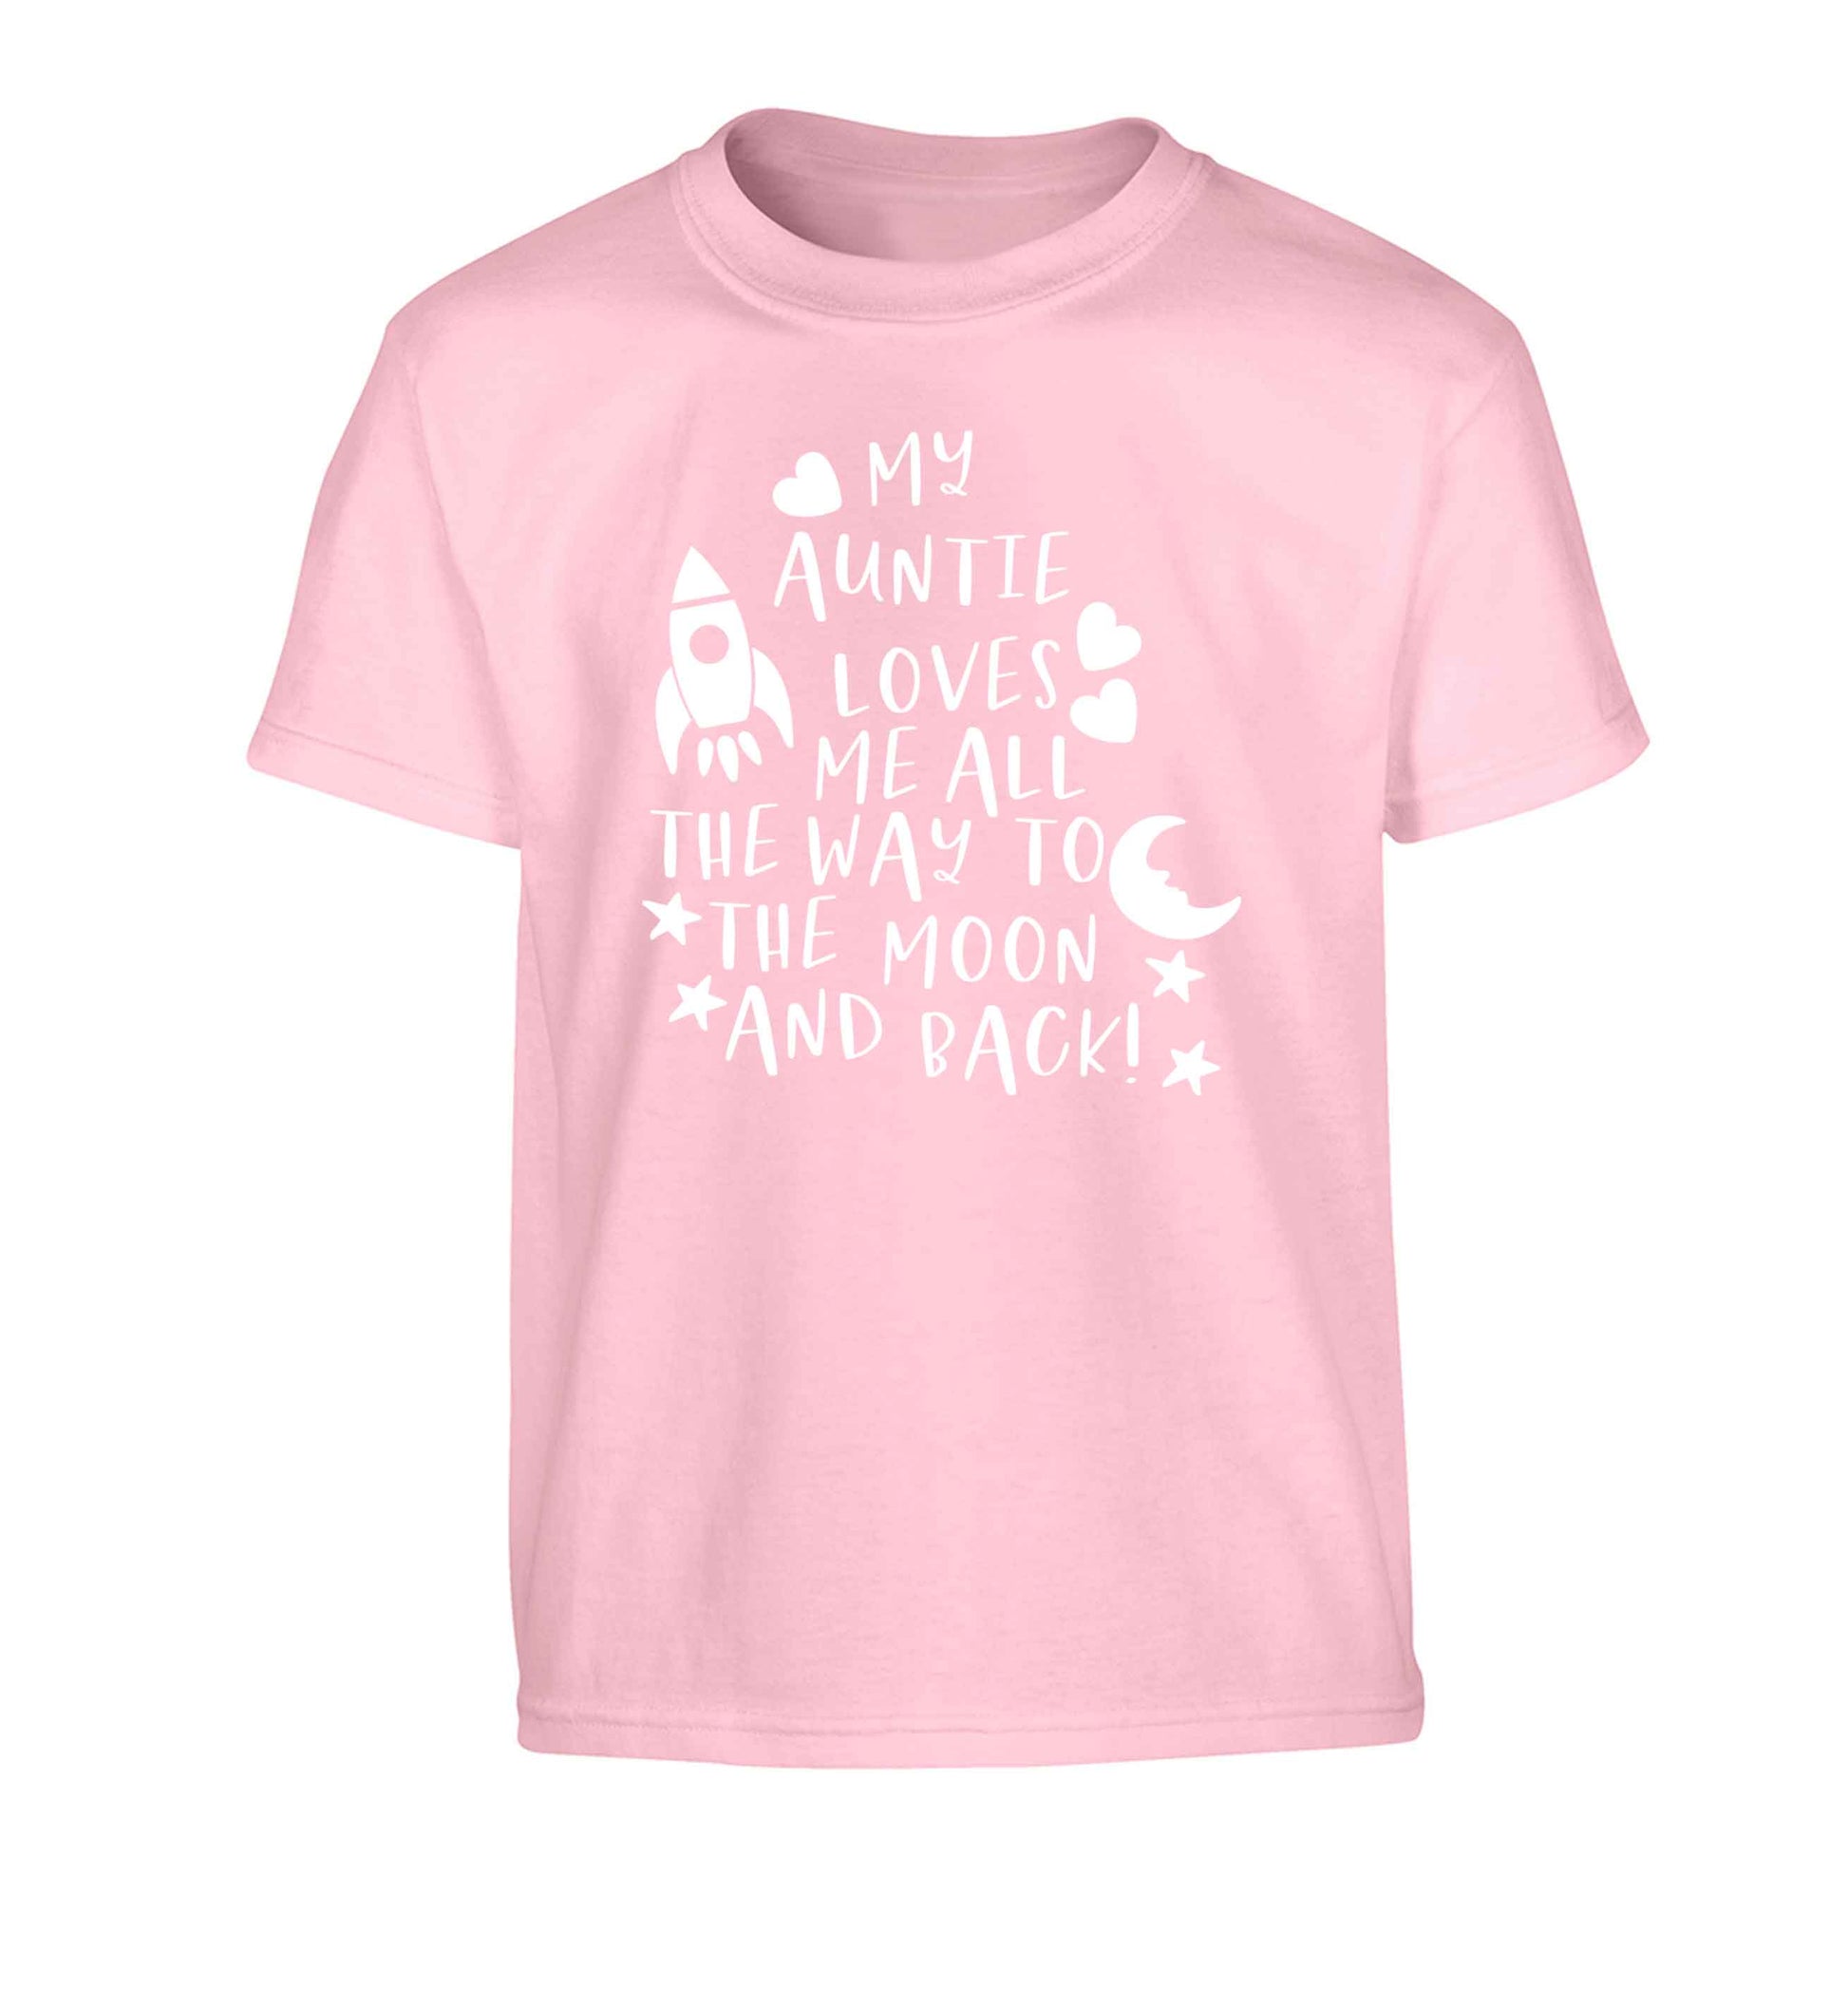 My auntie loves me all the way to the moon and back Children's light pink Tshirt 12-13 Years